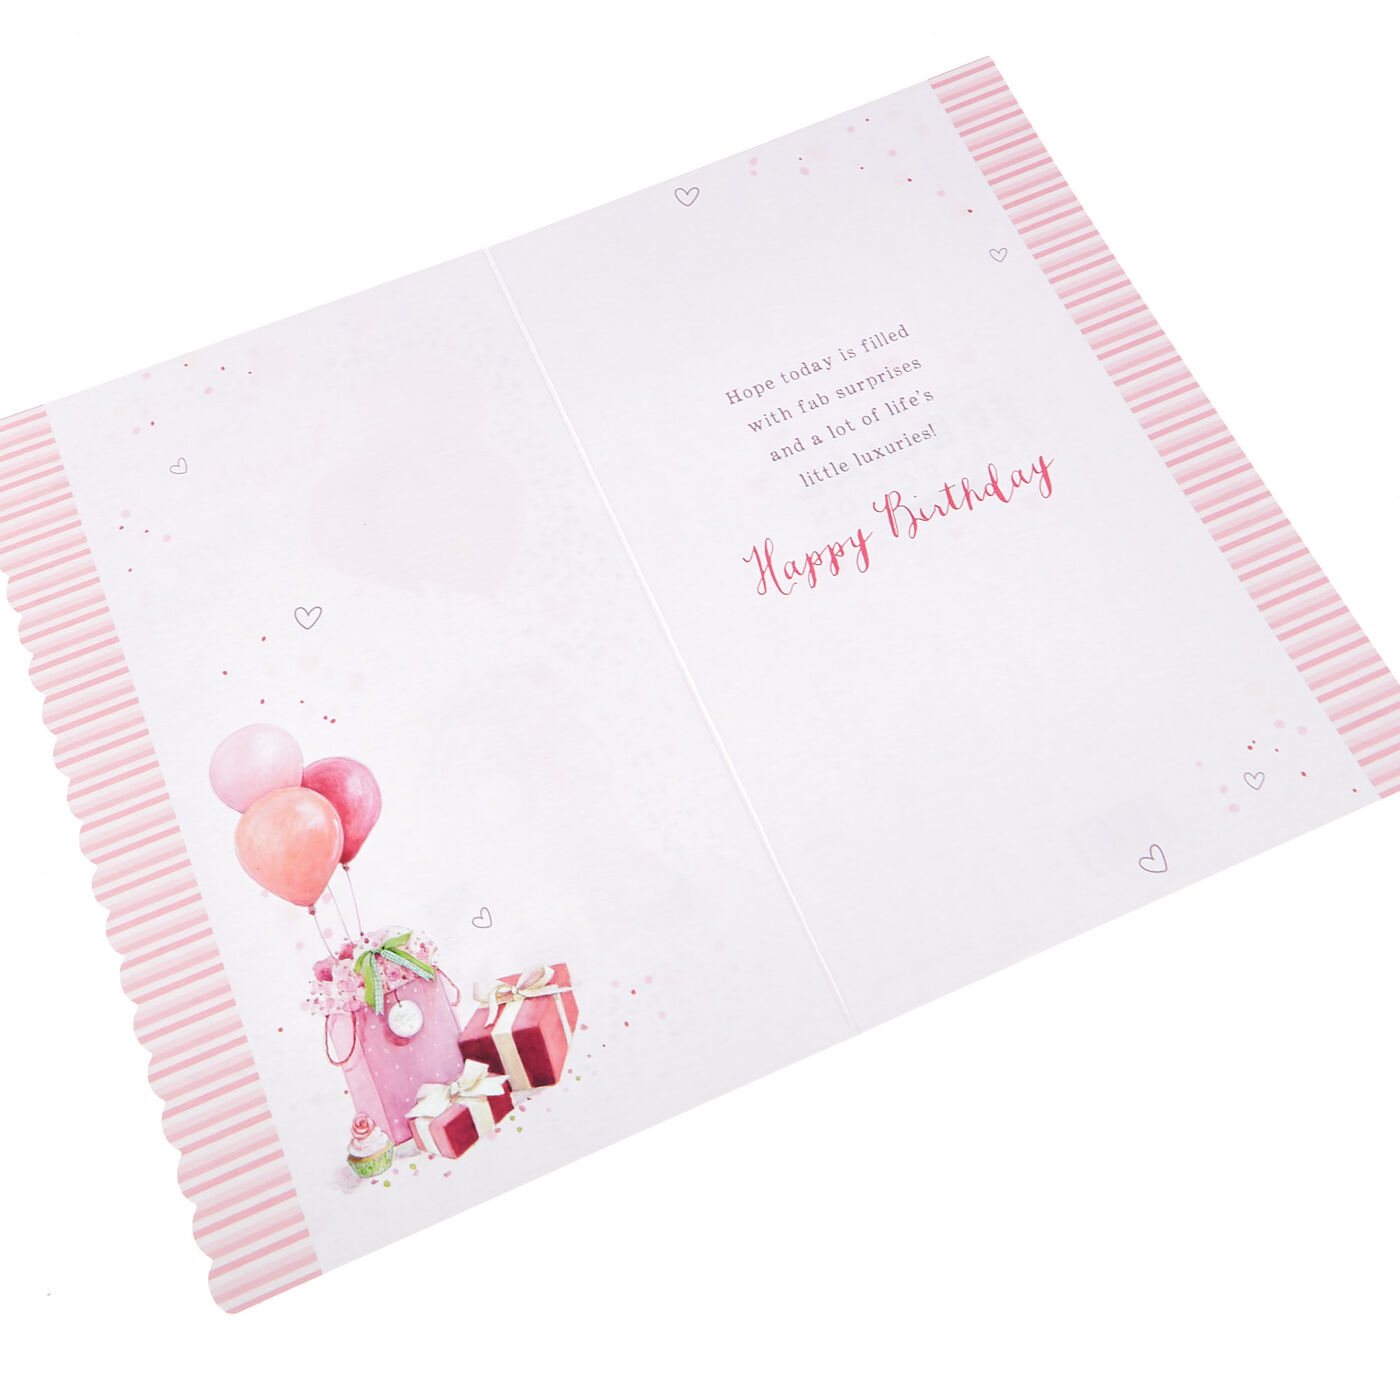 Buy Birthday Card - With Love Daughter in Law for GBP 0.99 | Card ...